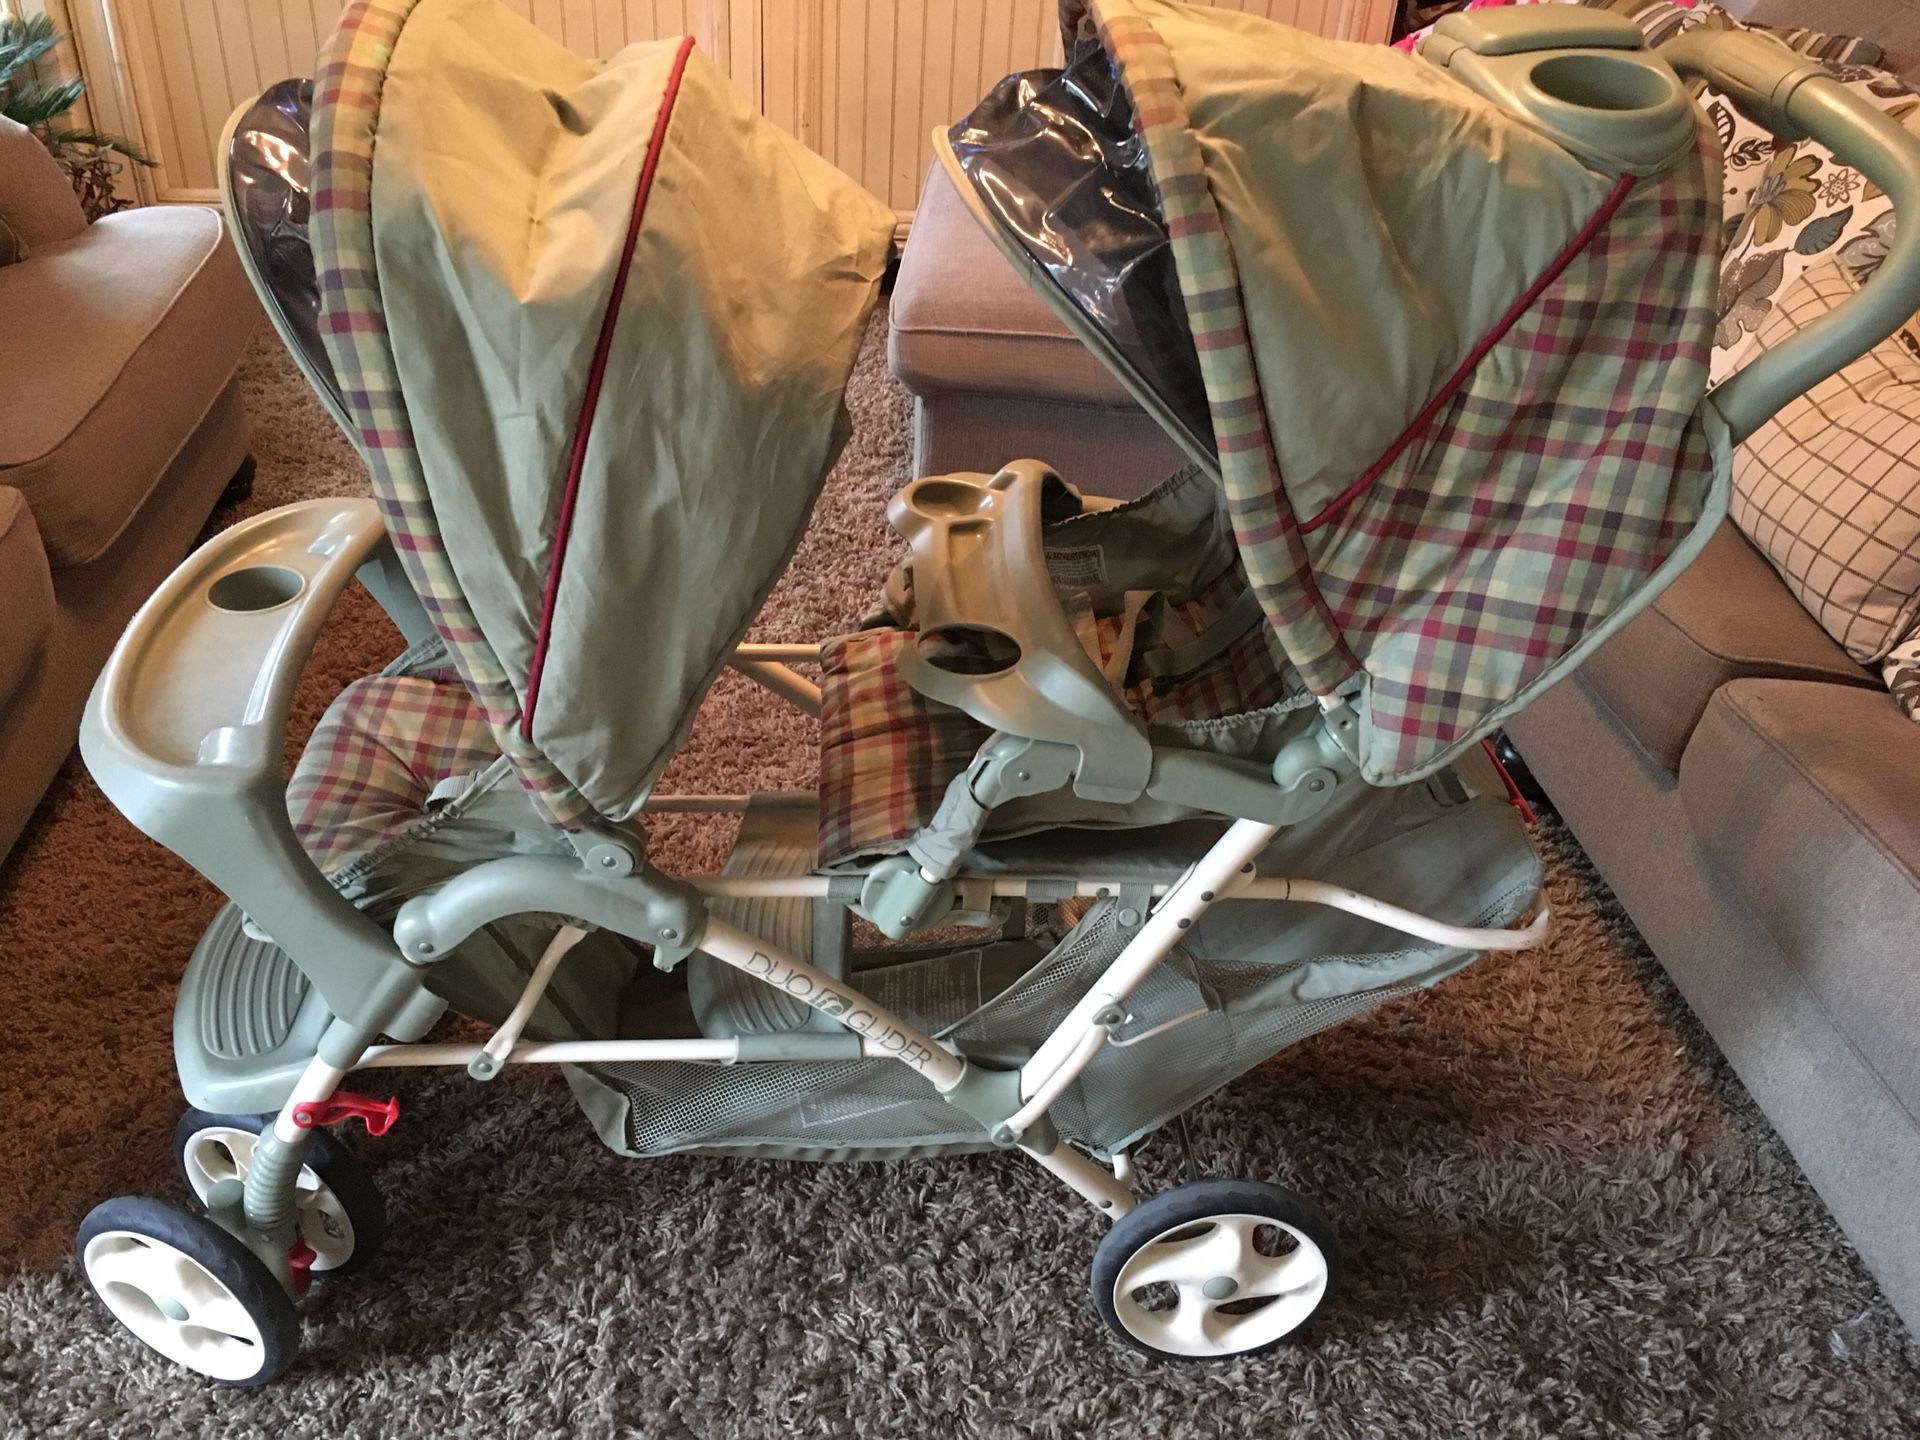 Double stroller by Graco Duo Glider